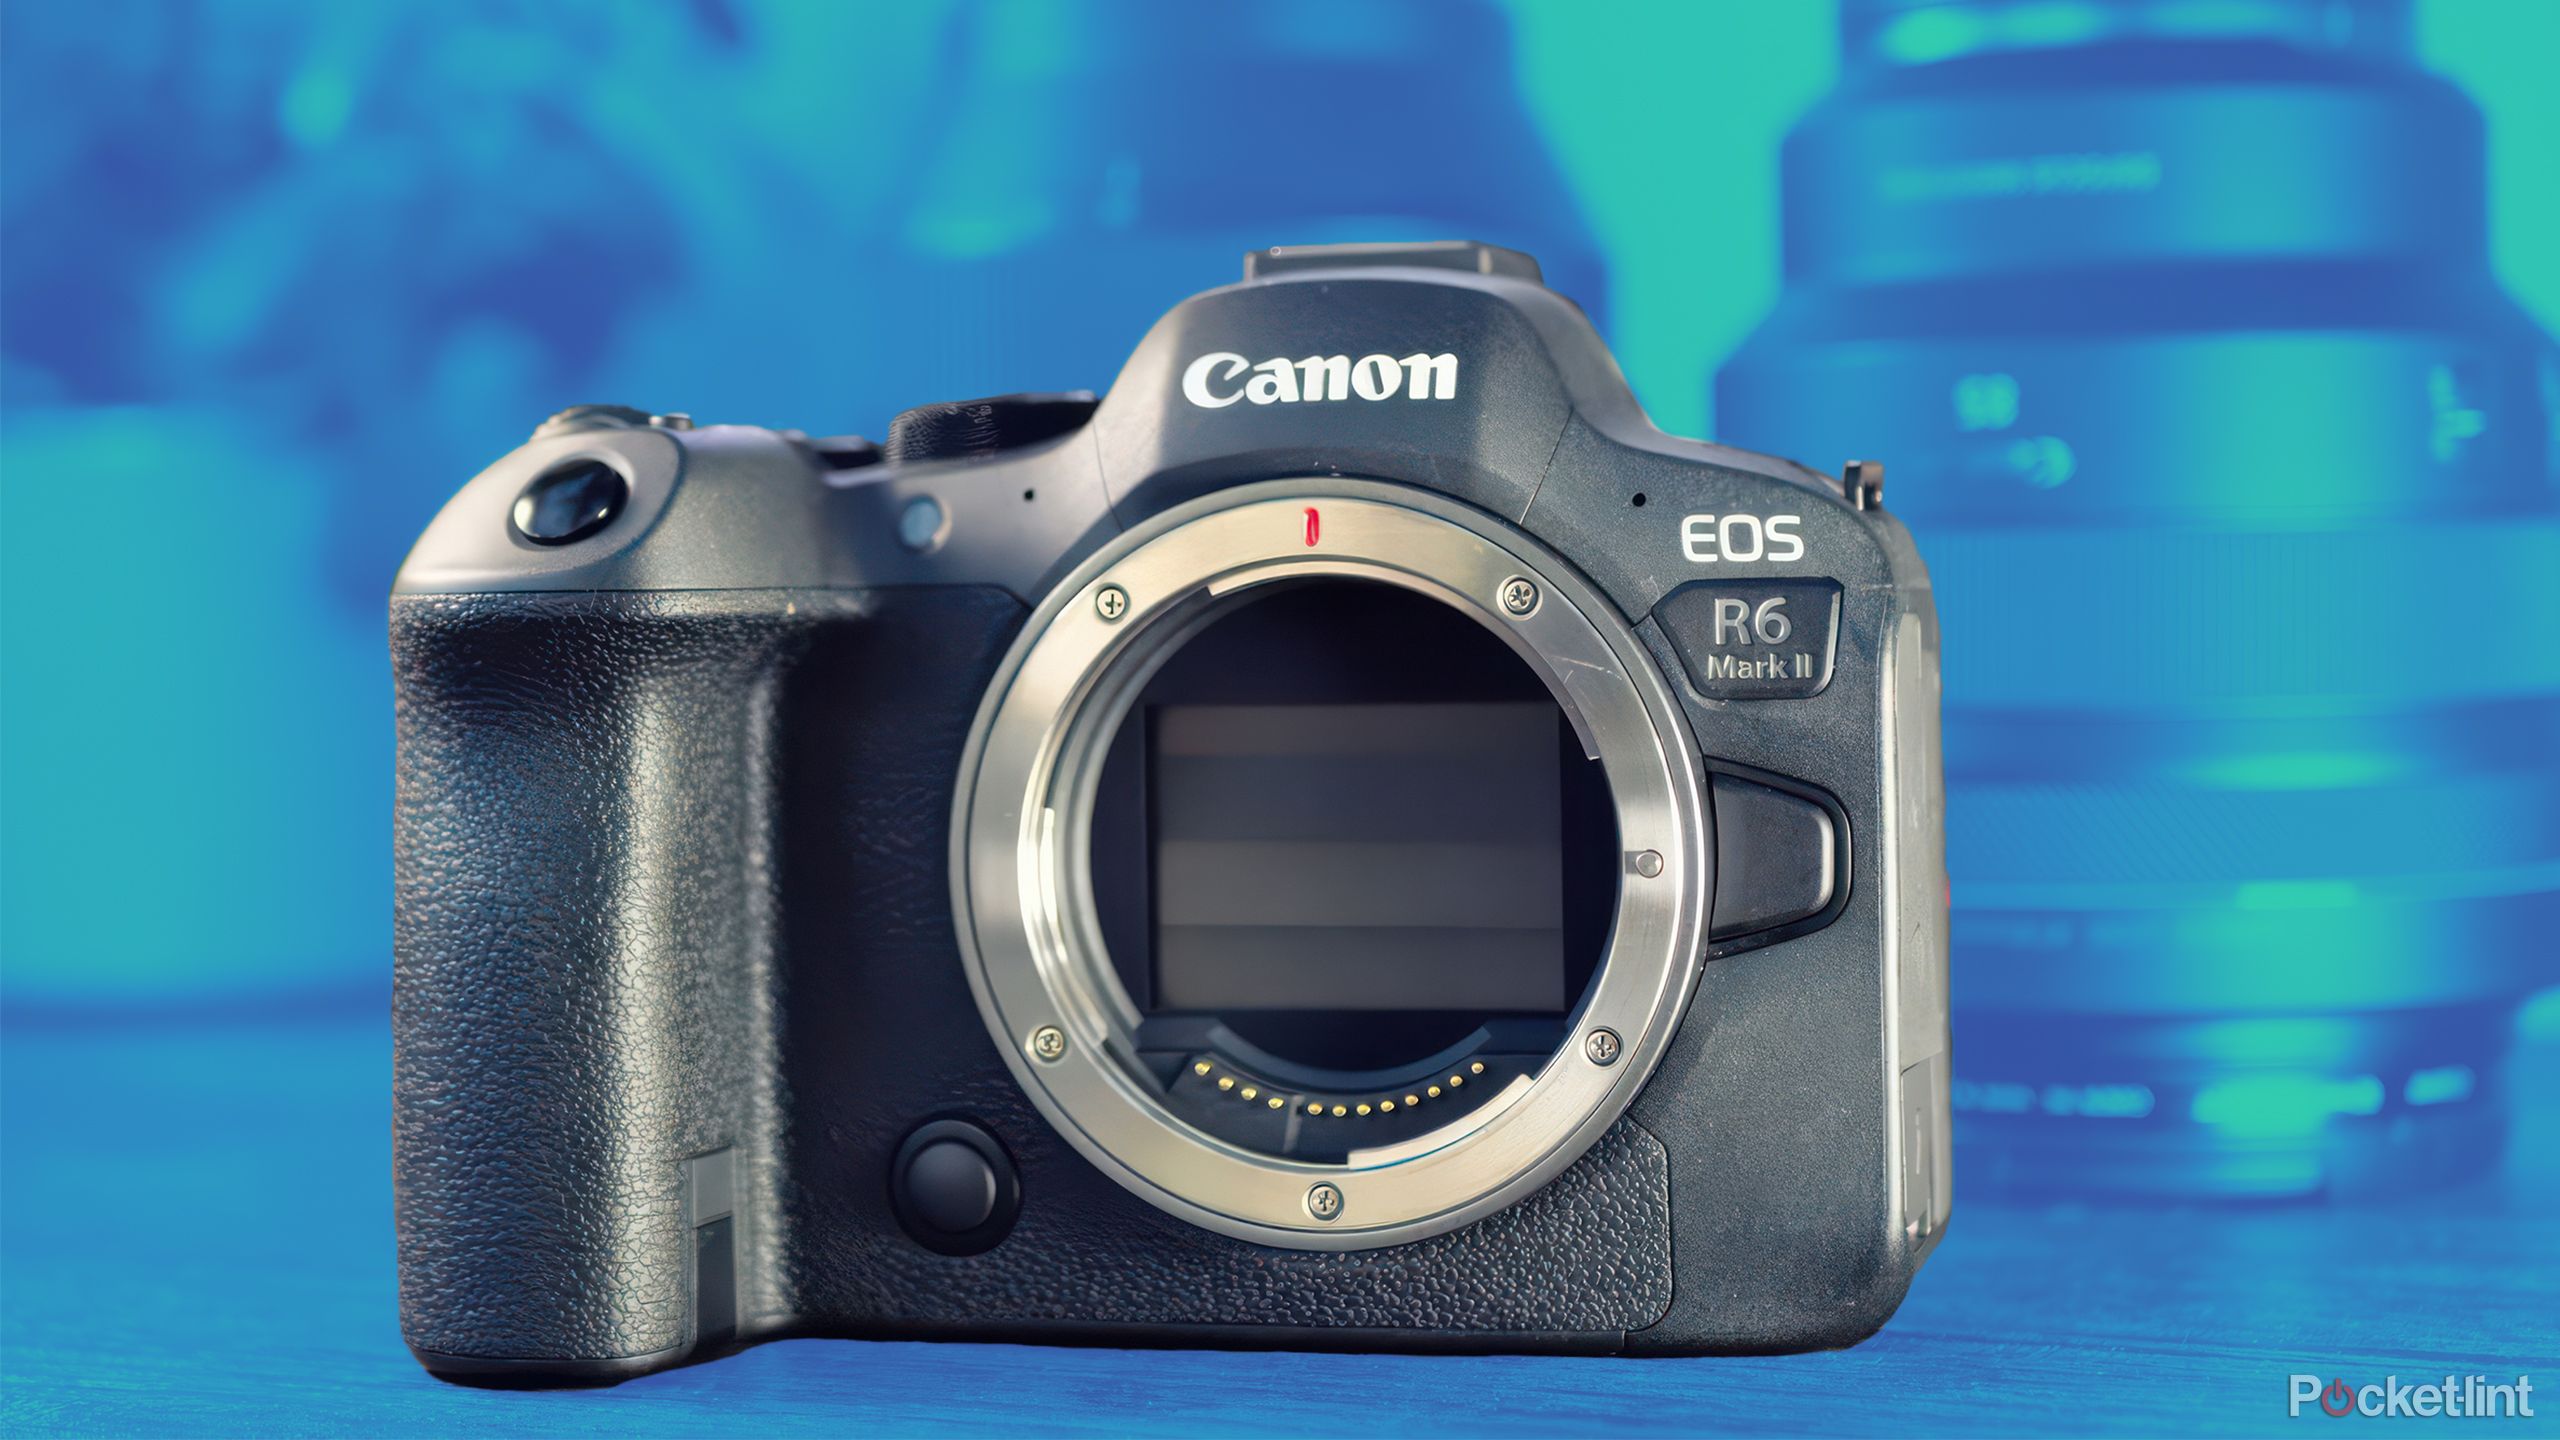 The Canon R6 Mark II in front of blurred out lenses that are in a blue-green gradient.